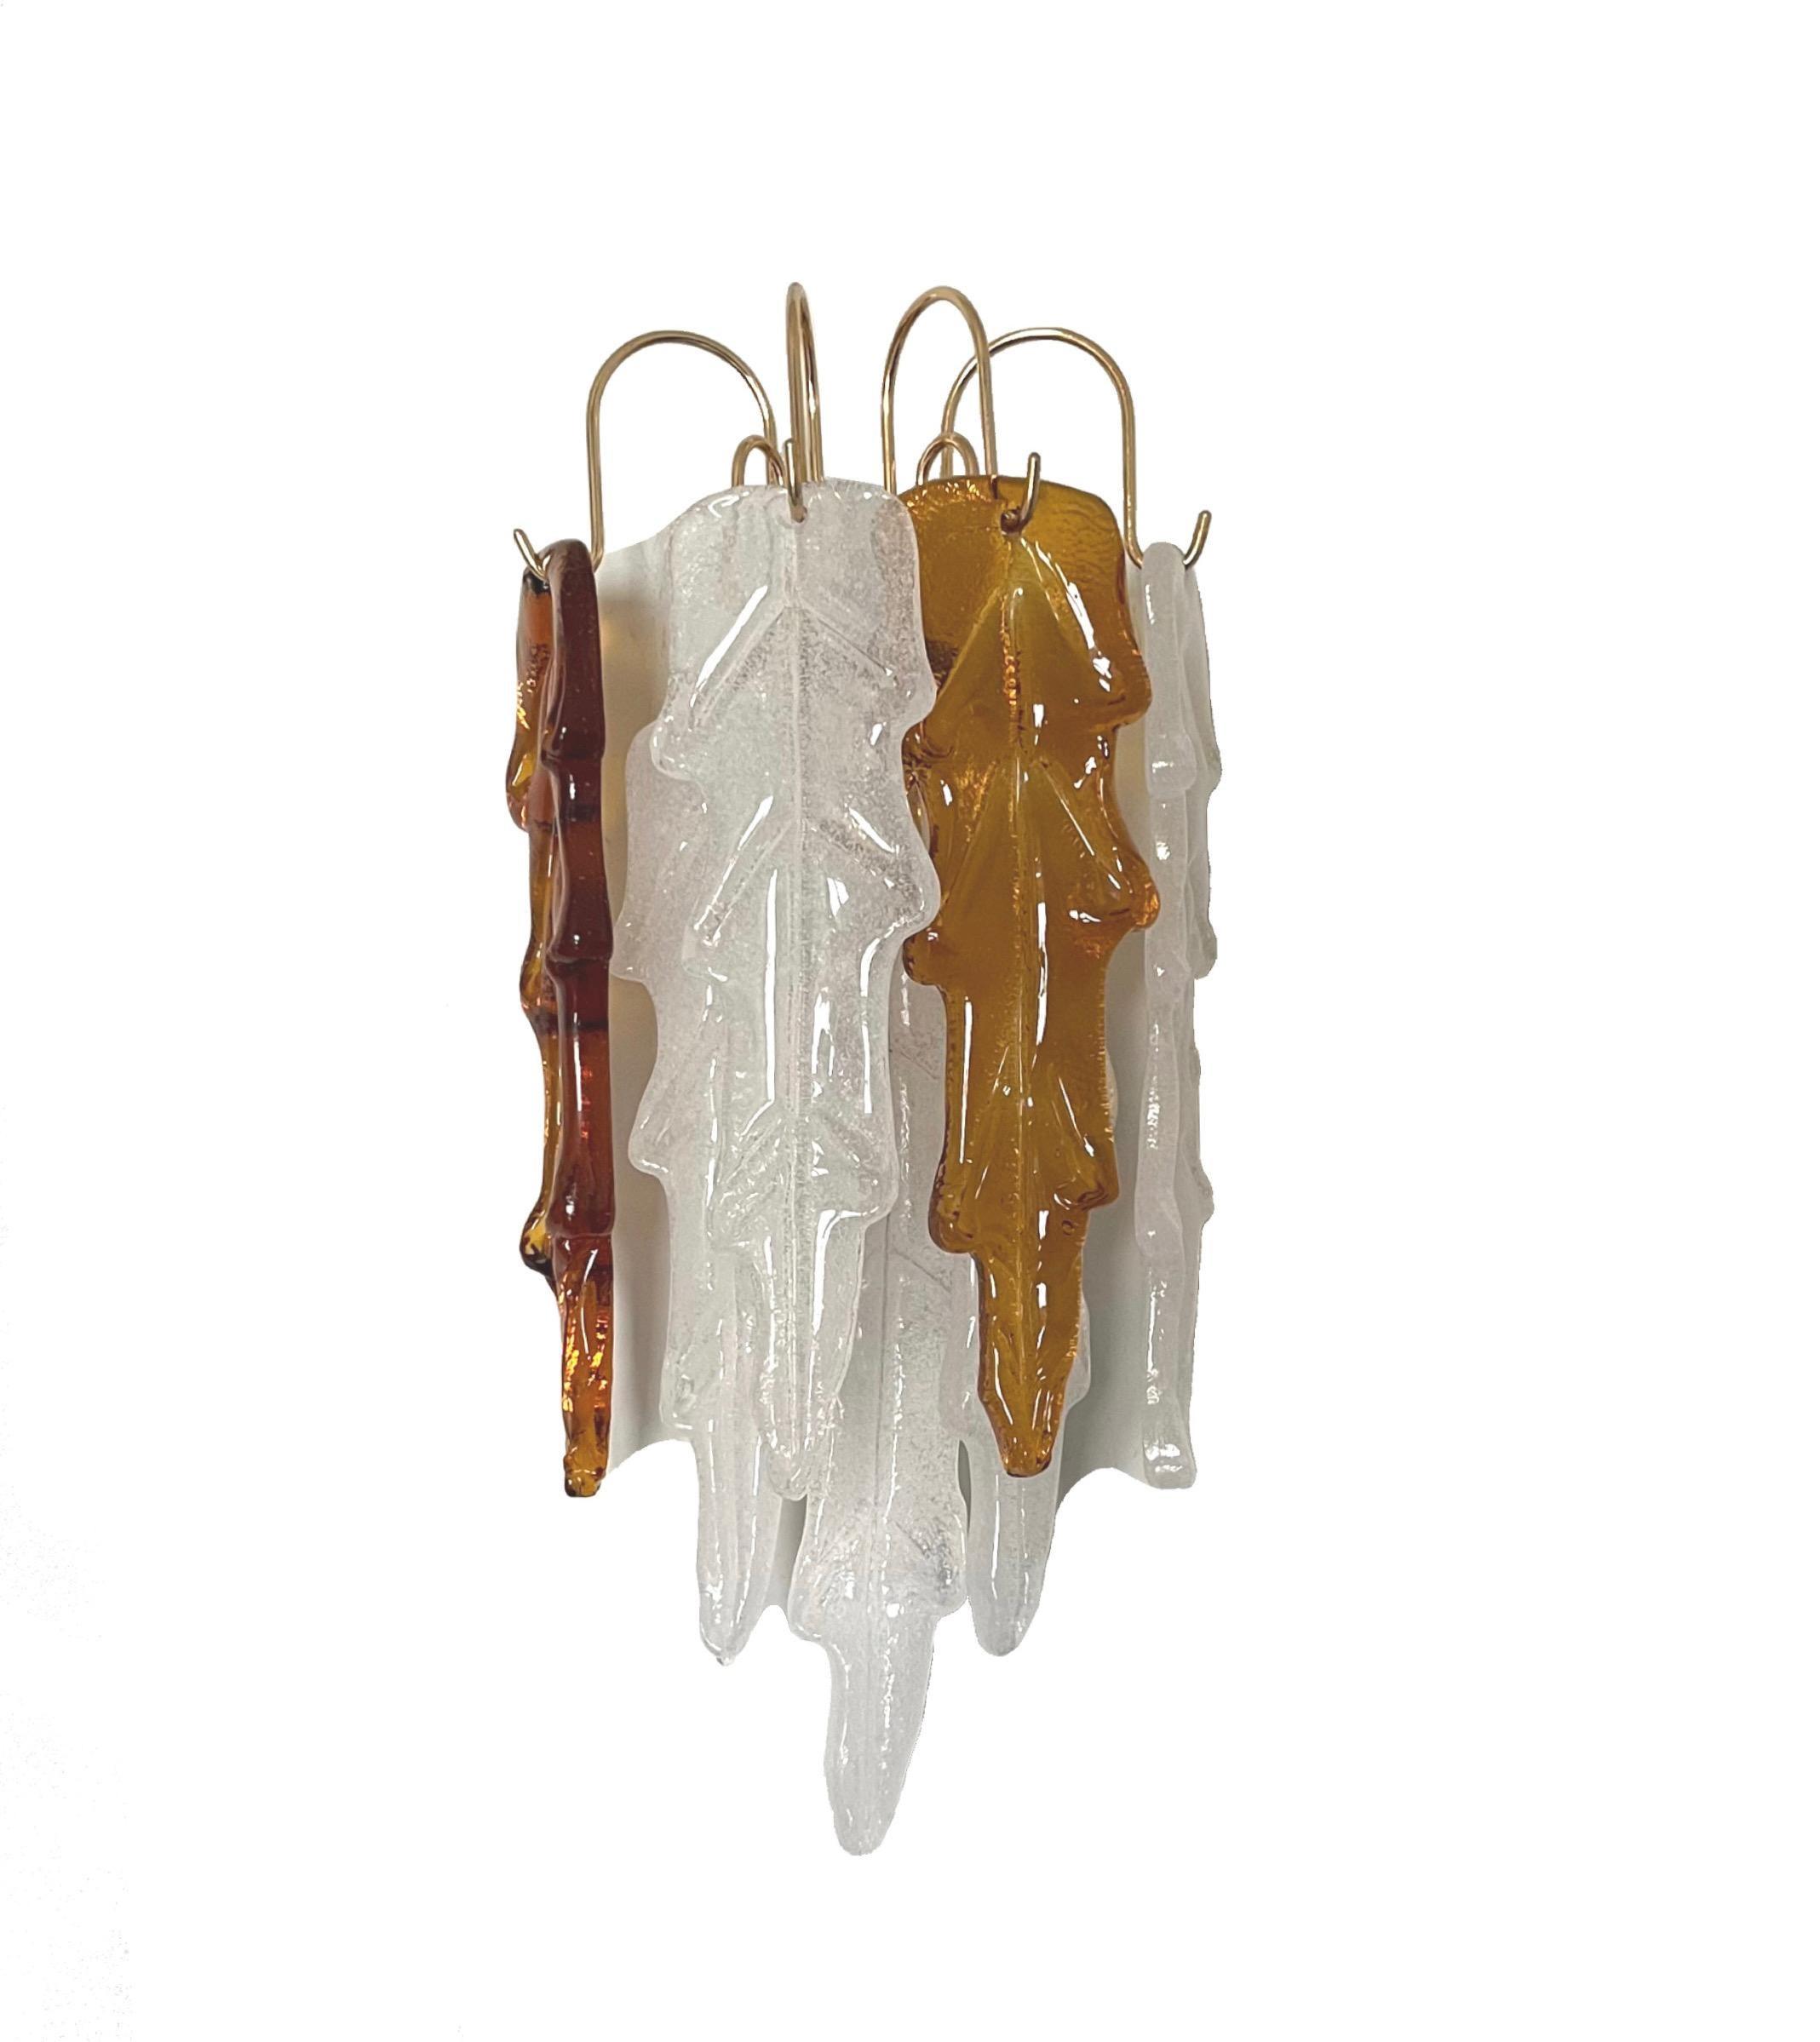 Unique and beauty Pair of Italian white amber Murano glass Wall Sconces from 1970s.
These Wall Sconces were designed and manufactured during the 1970s in Italy for the Venice Company 